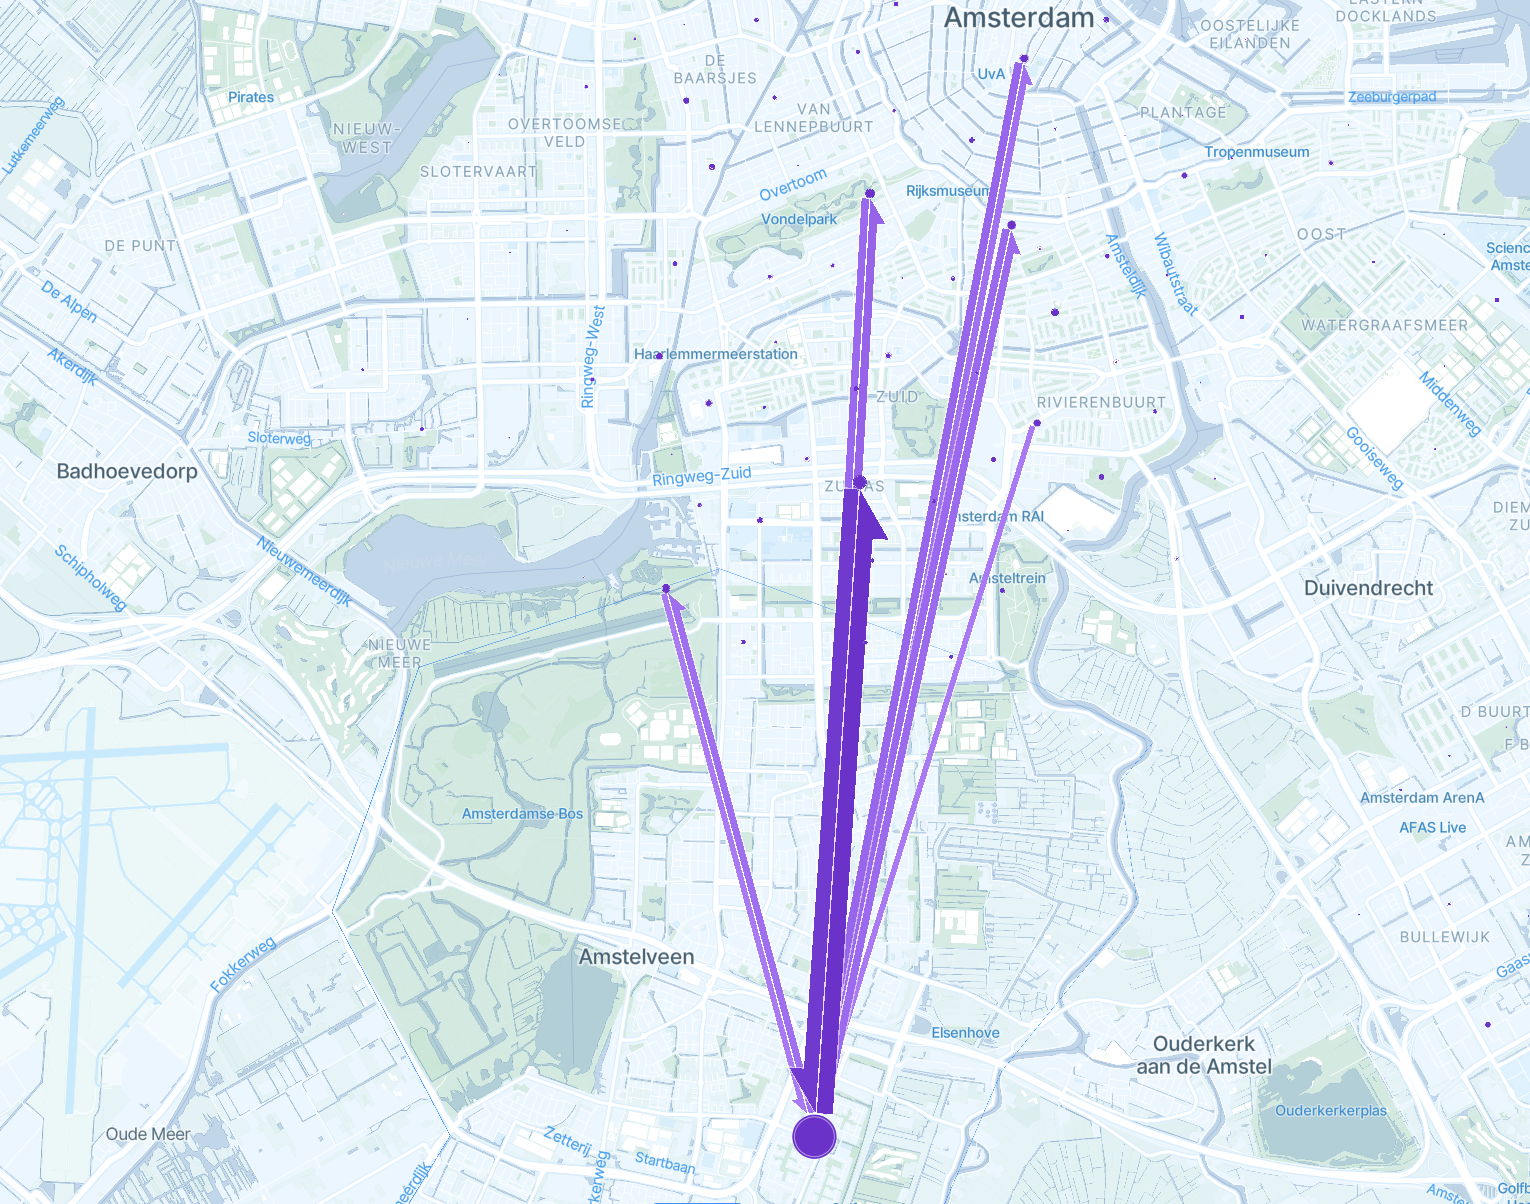 Use of the Vianova platform in the City of Amsterdam